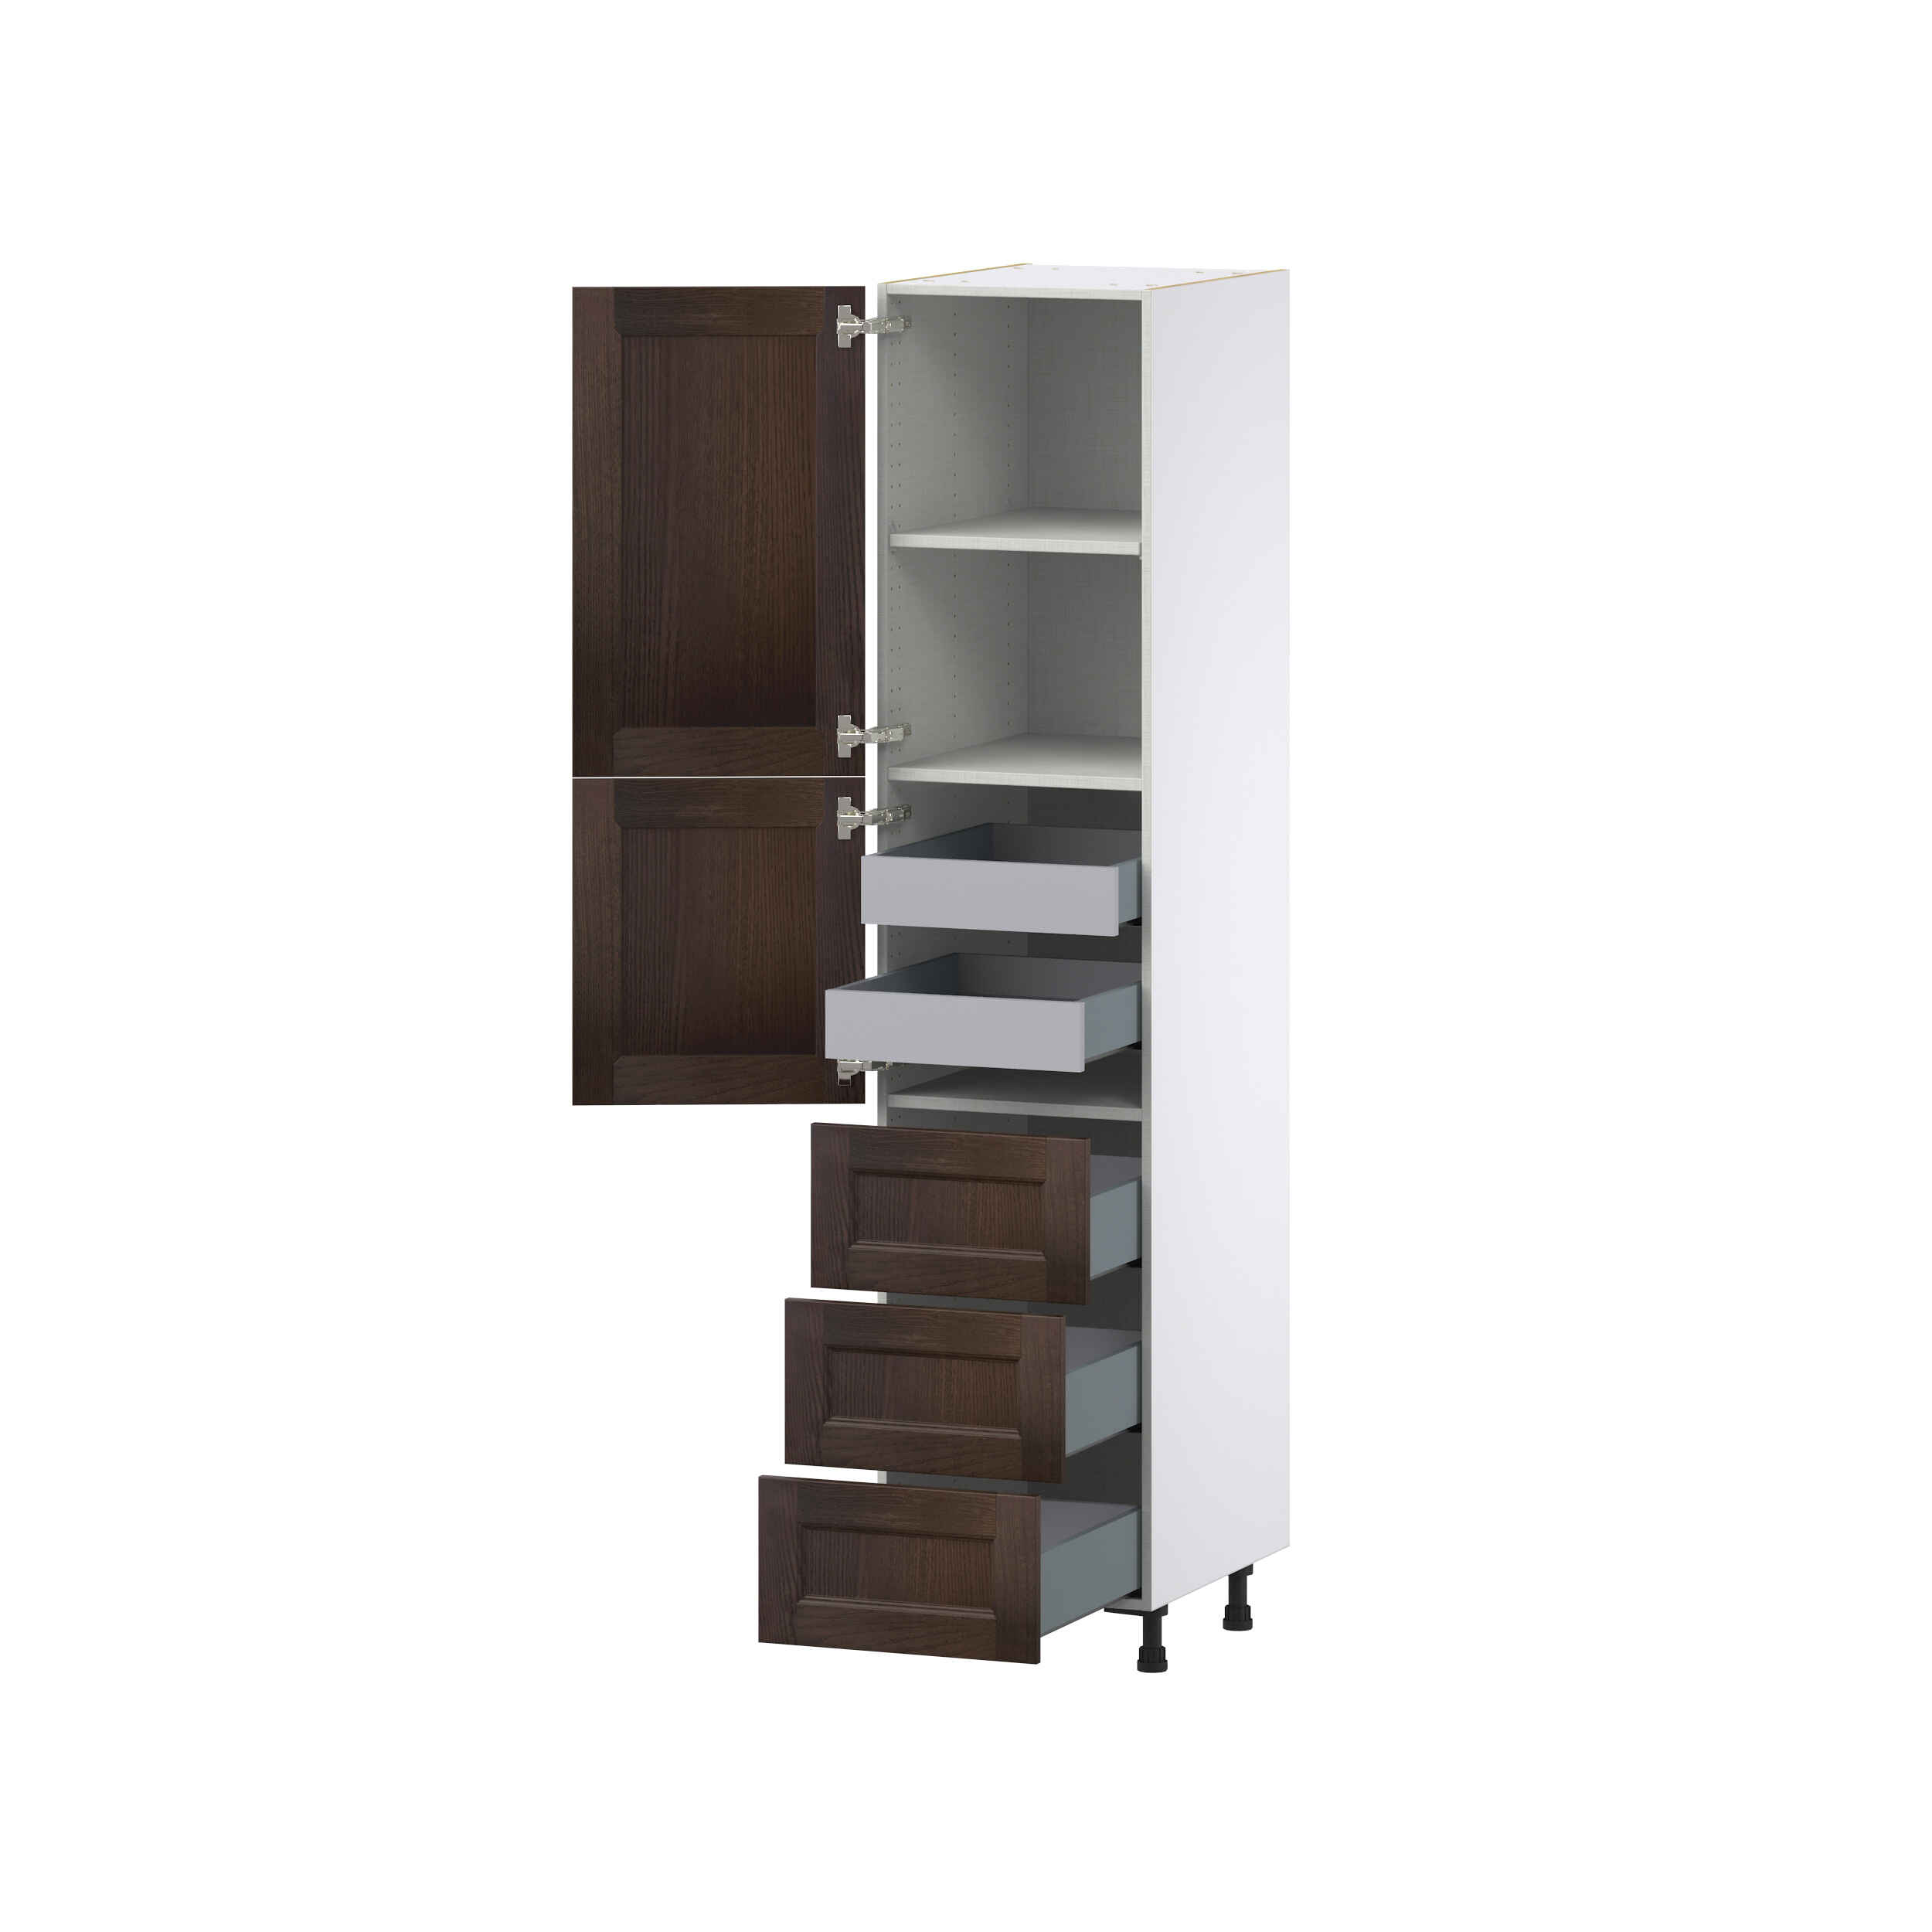 Summerina Chestnut Solid Wood Recessed Assembled Pantry Cabinet 2 Doors with 3 Drawers and 2 Inner Drawers (18 in. W X 84.5 in. H X 24 in. D)